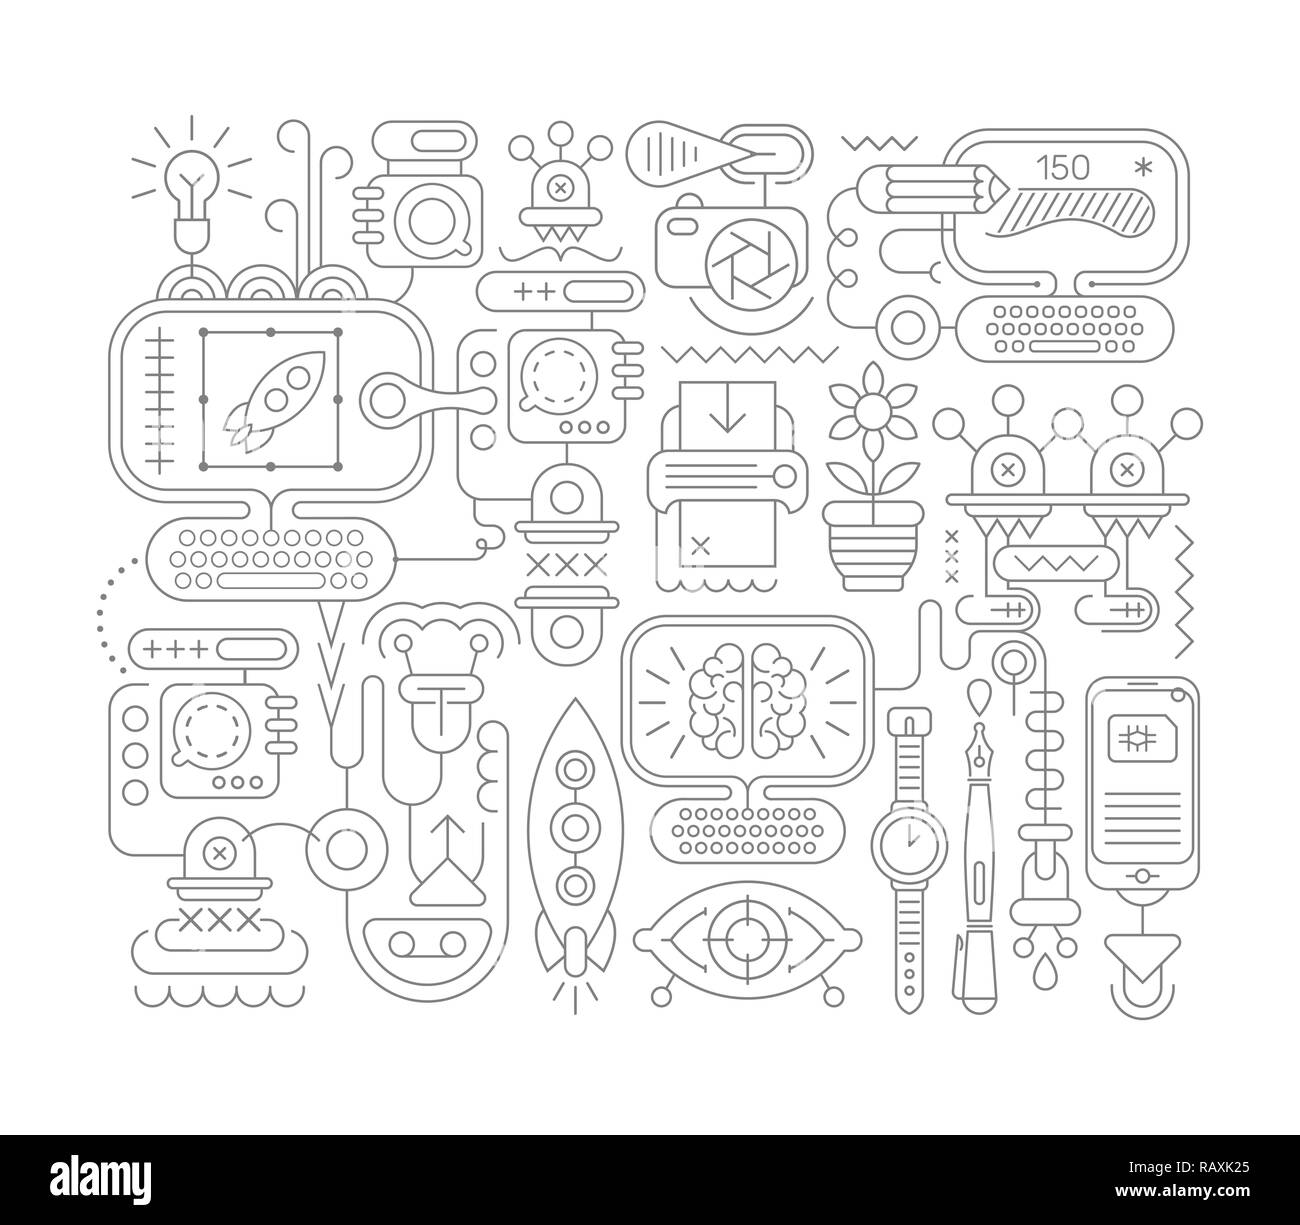 Graphic Design abstract line art vector illustration Stock Vector Image ...